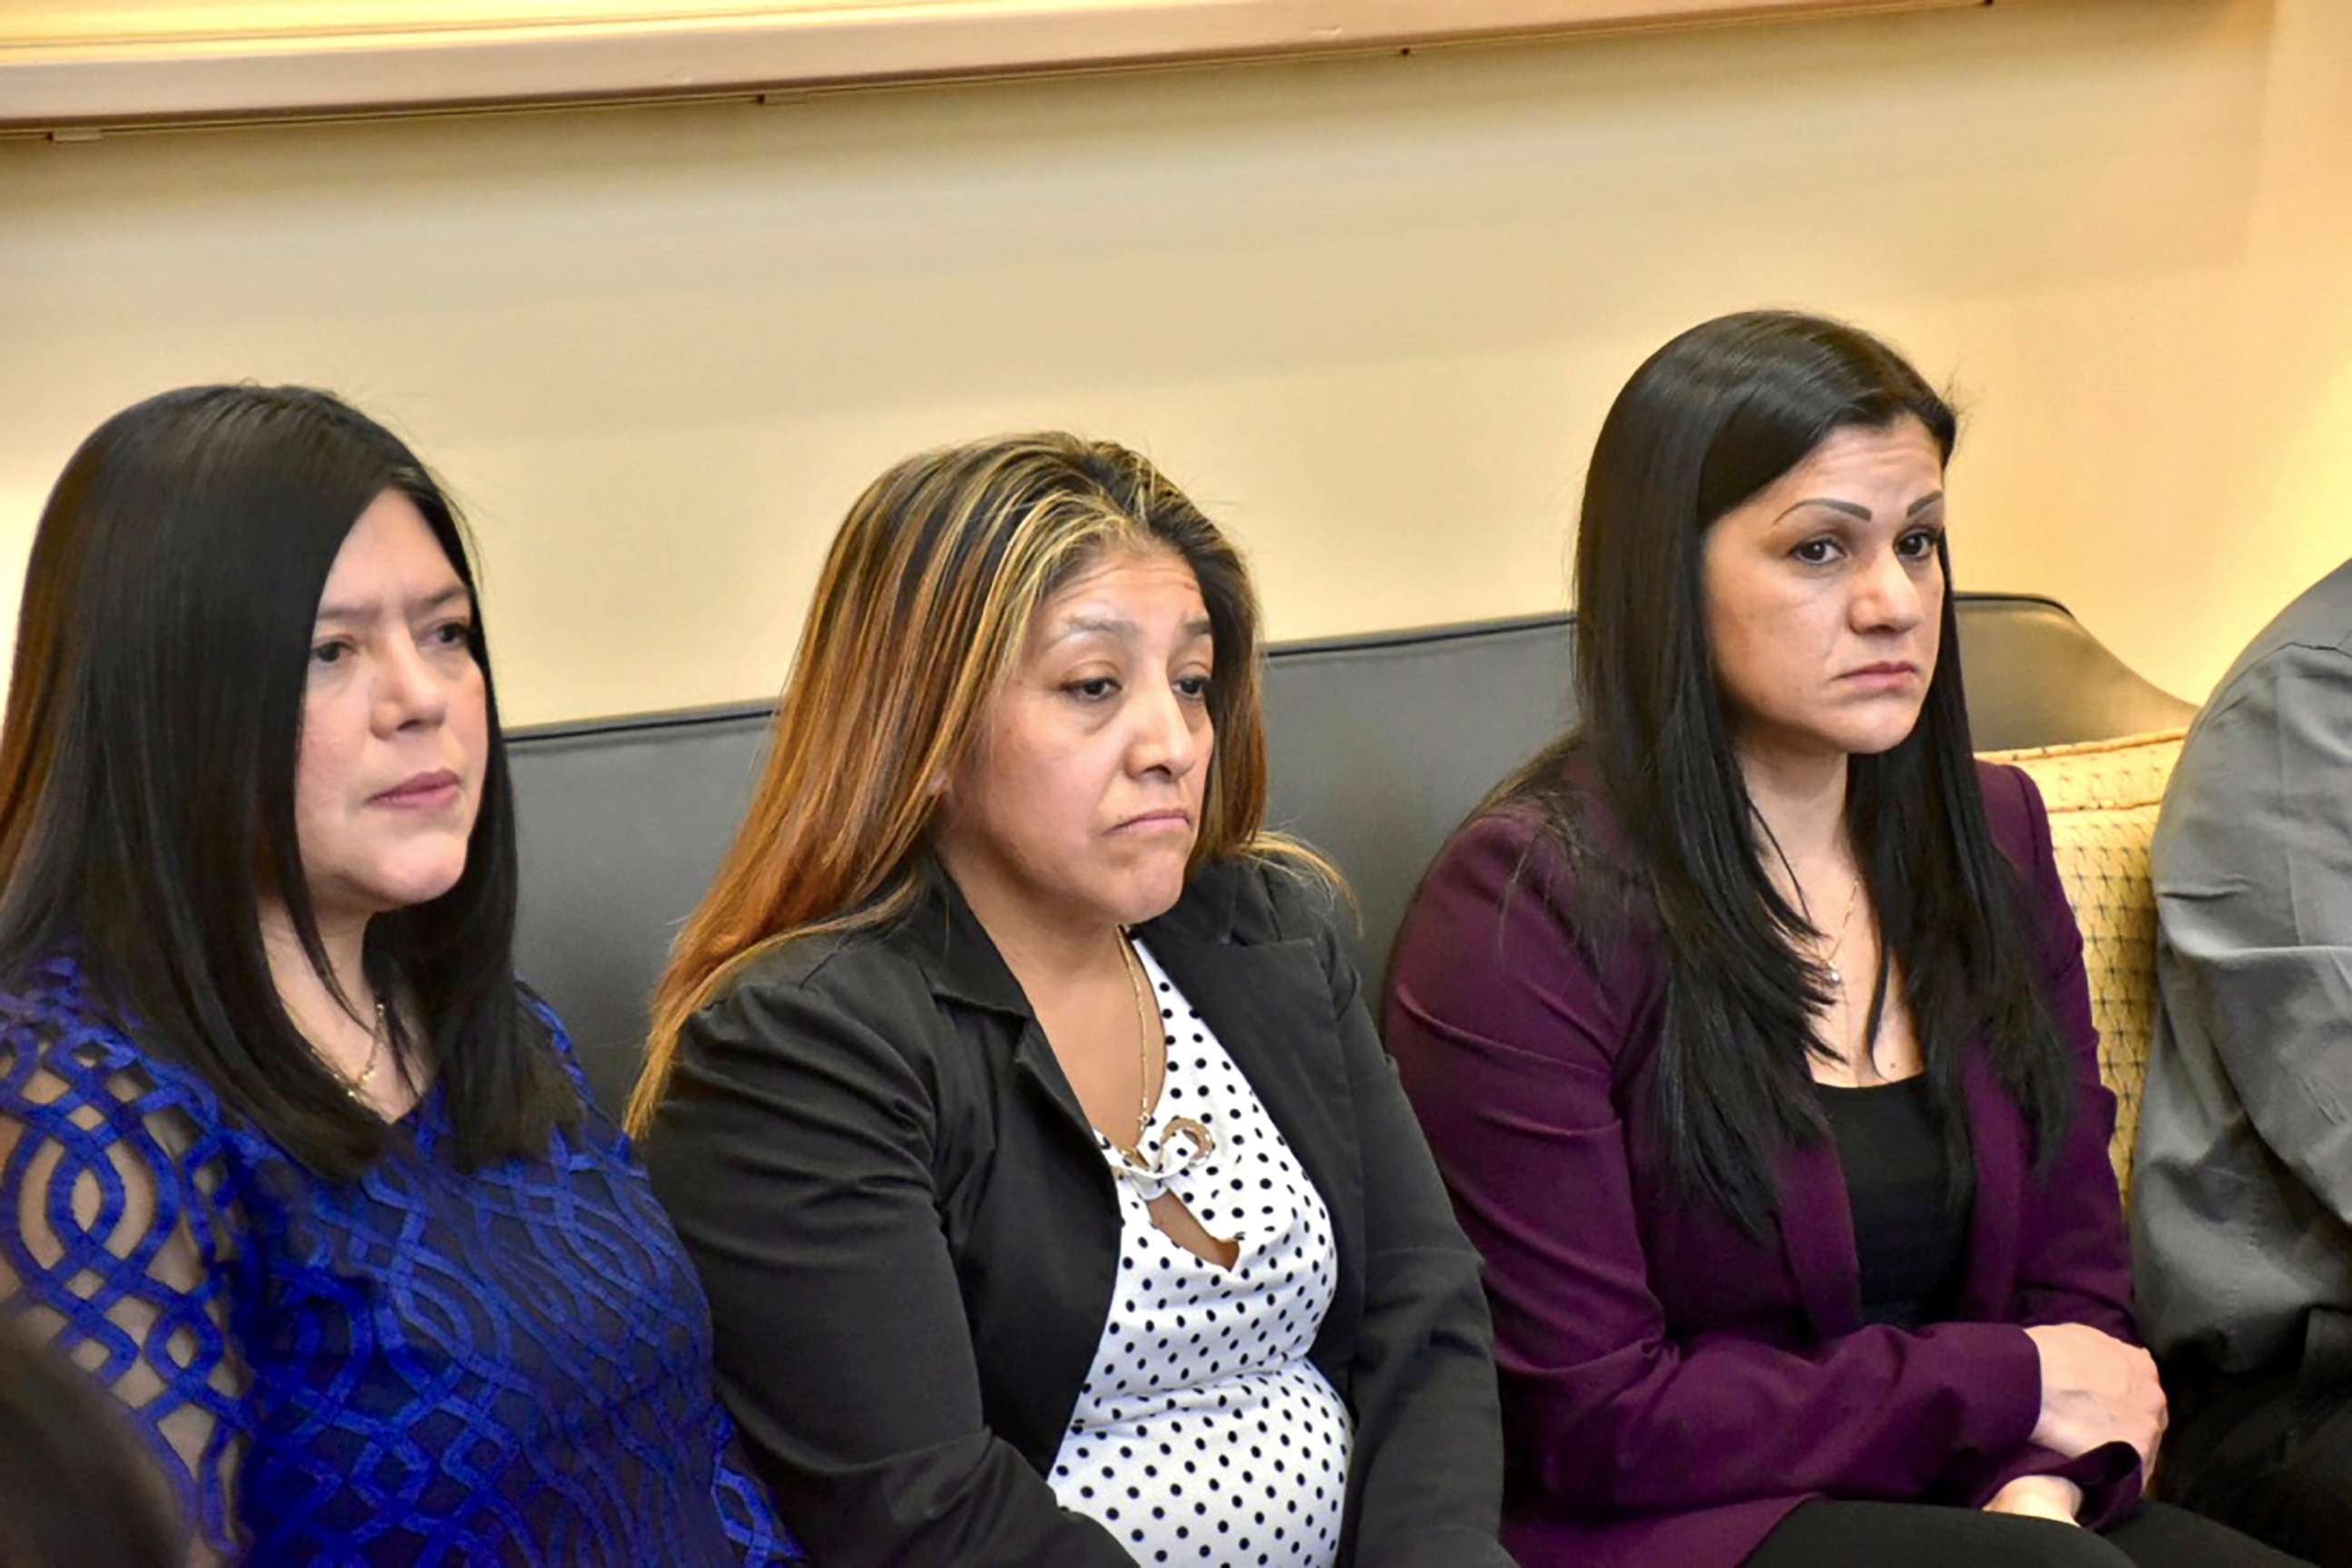 PHOTO: Undocumented immigrants who say they were fired from Trump's golf courses meet with Sen. Bob Menendez on Capitol Hill.